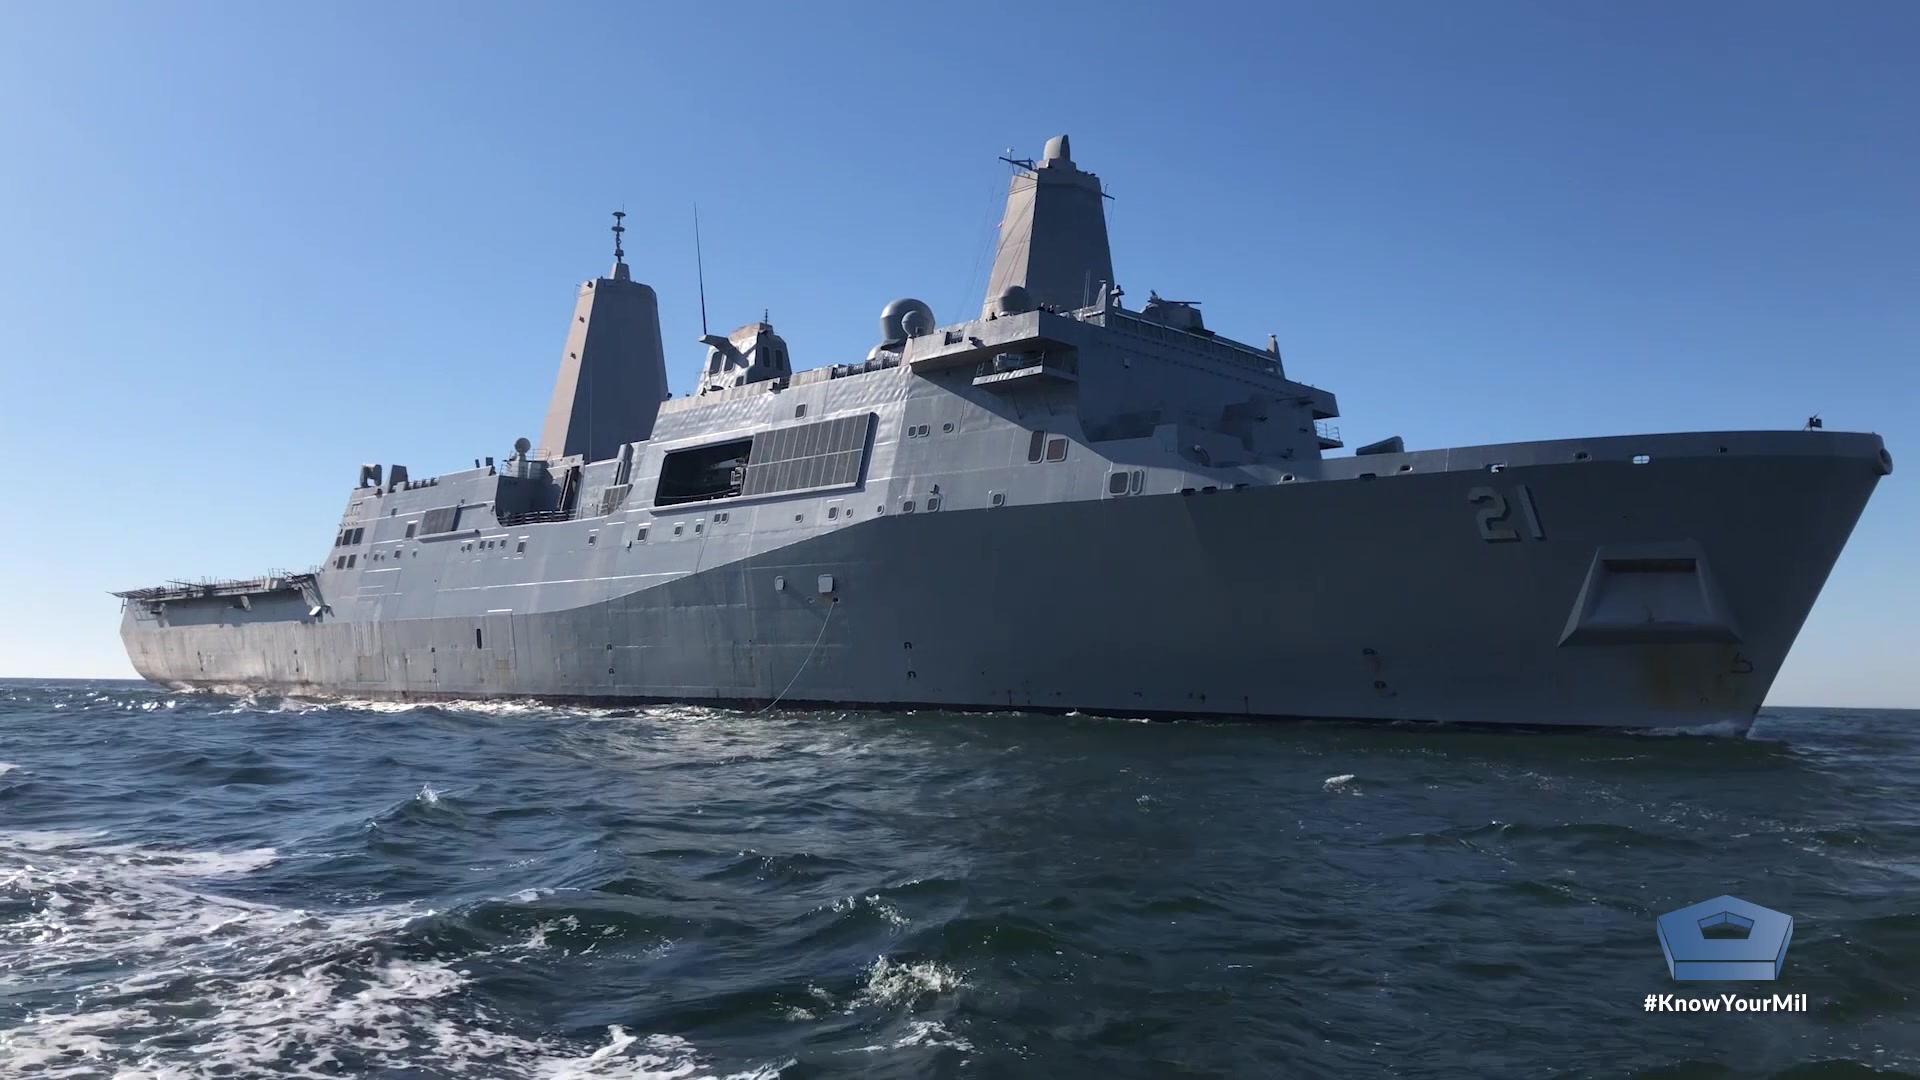 The amphibious transport dock USS New York “Airport” team ensures that the daily air operations of the ship are carried out successfully. They are also responsible for getting visitors and crew where they need to be, when they need to be there.